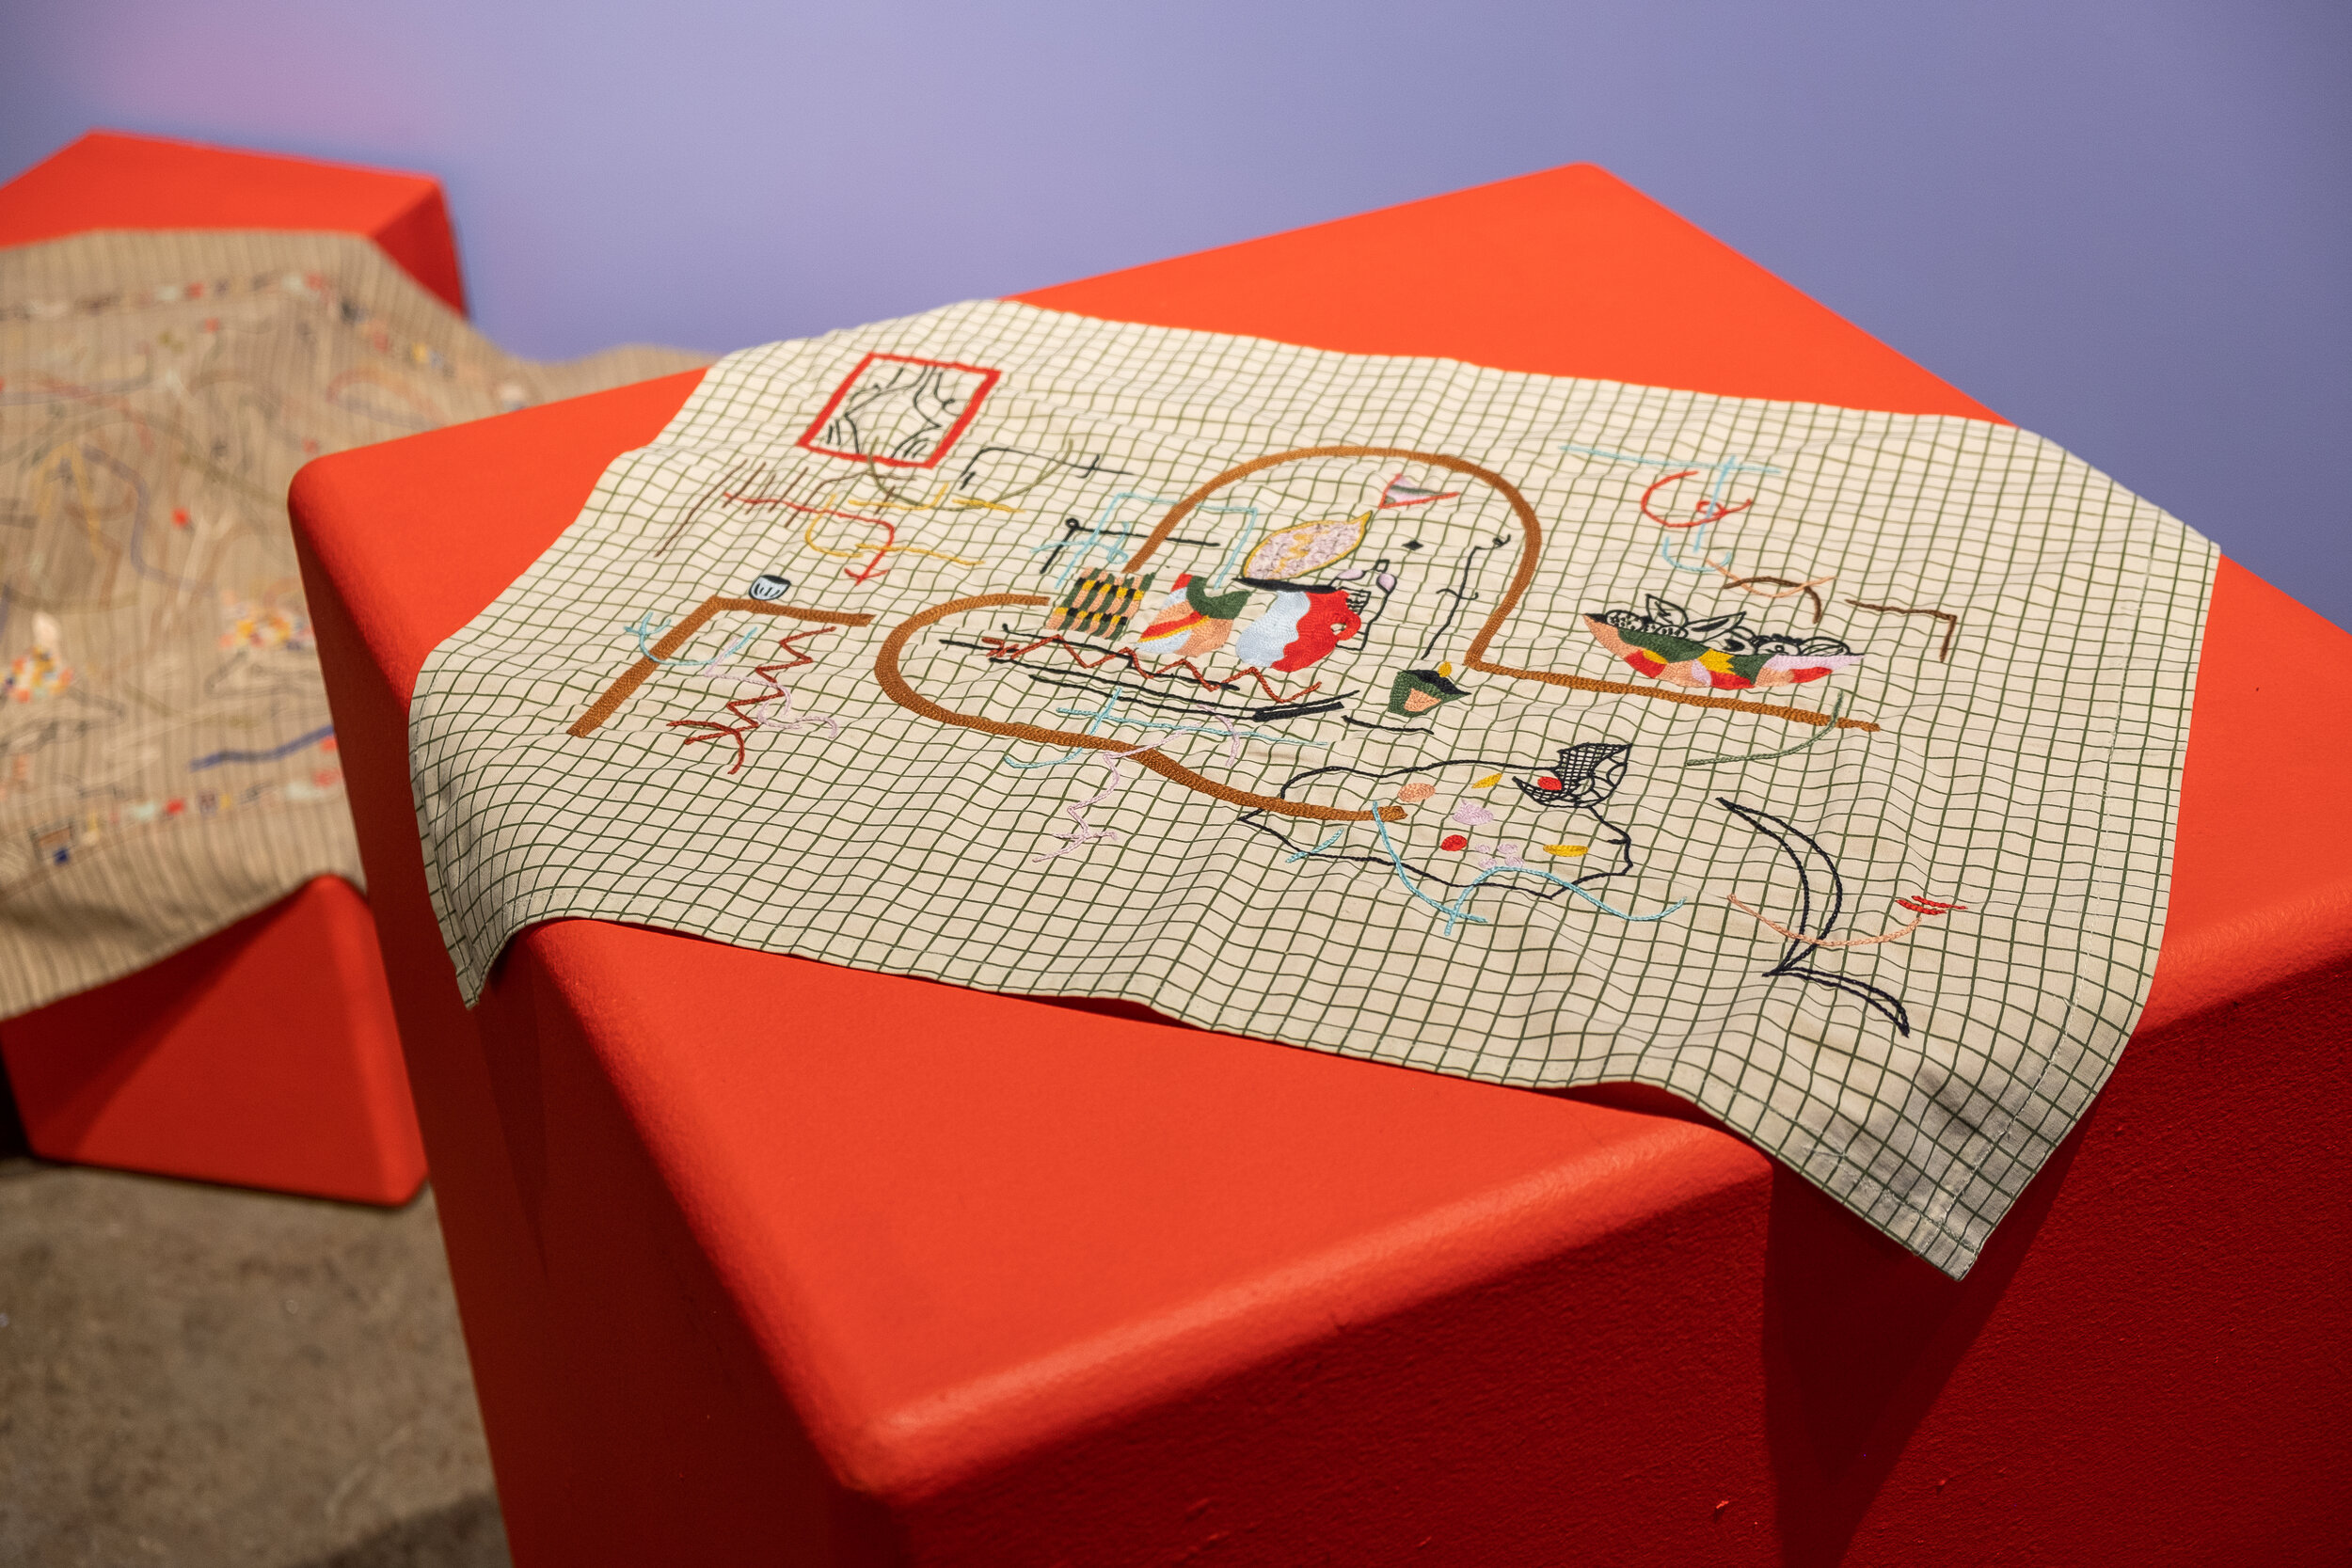  This is a piece of white fabric with a black grid design laying on a bright red plinth, with the corners falling off of the edge. The fabric is embroidered with what looks to be a sort of still-life scene. Moving from left to right there is a red wi